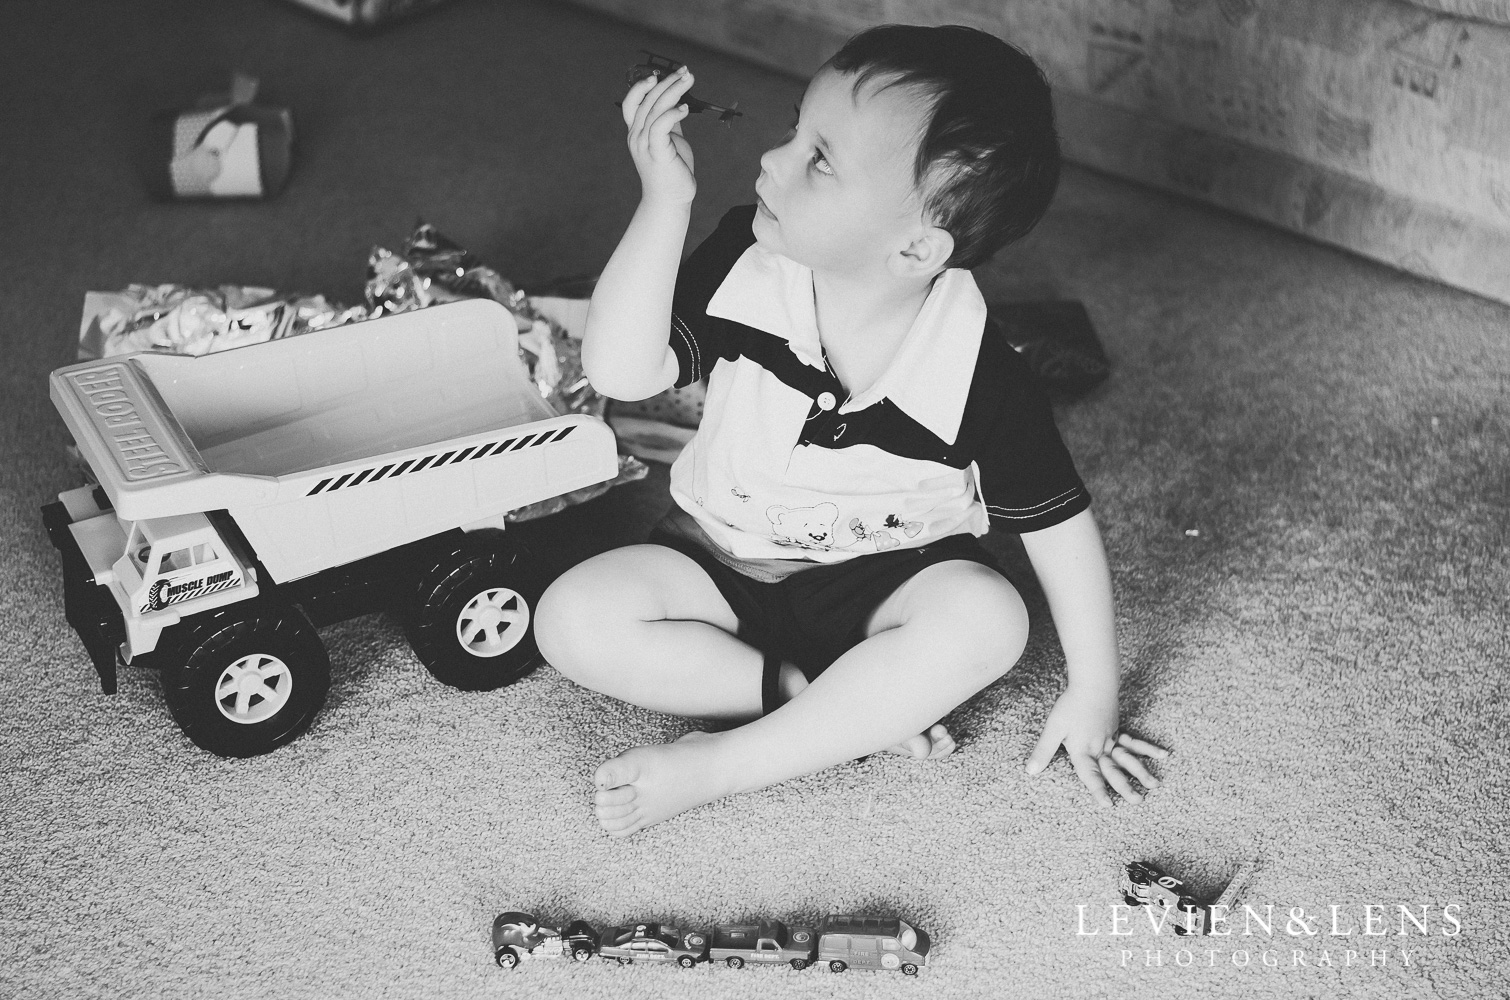 Playing with cars